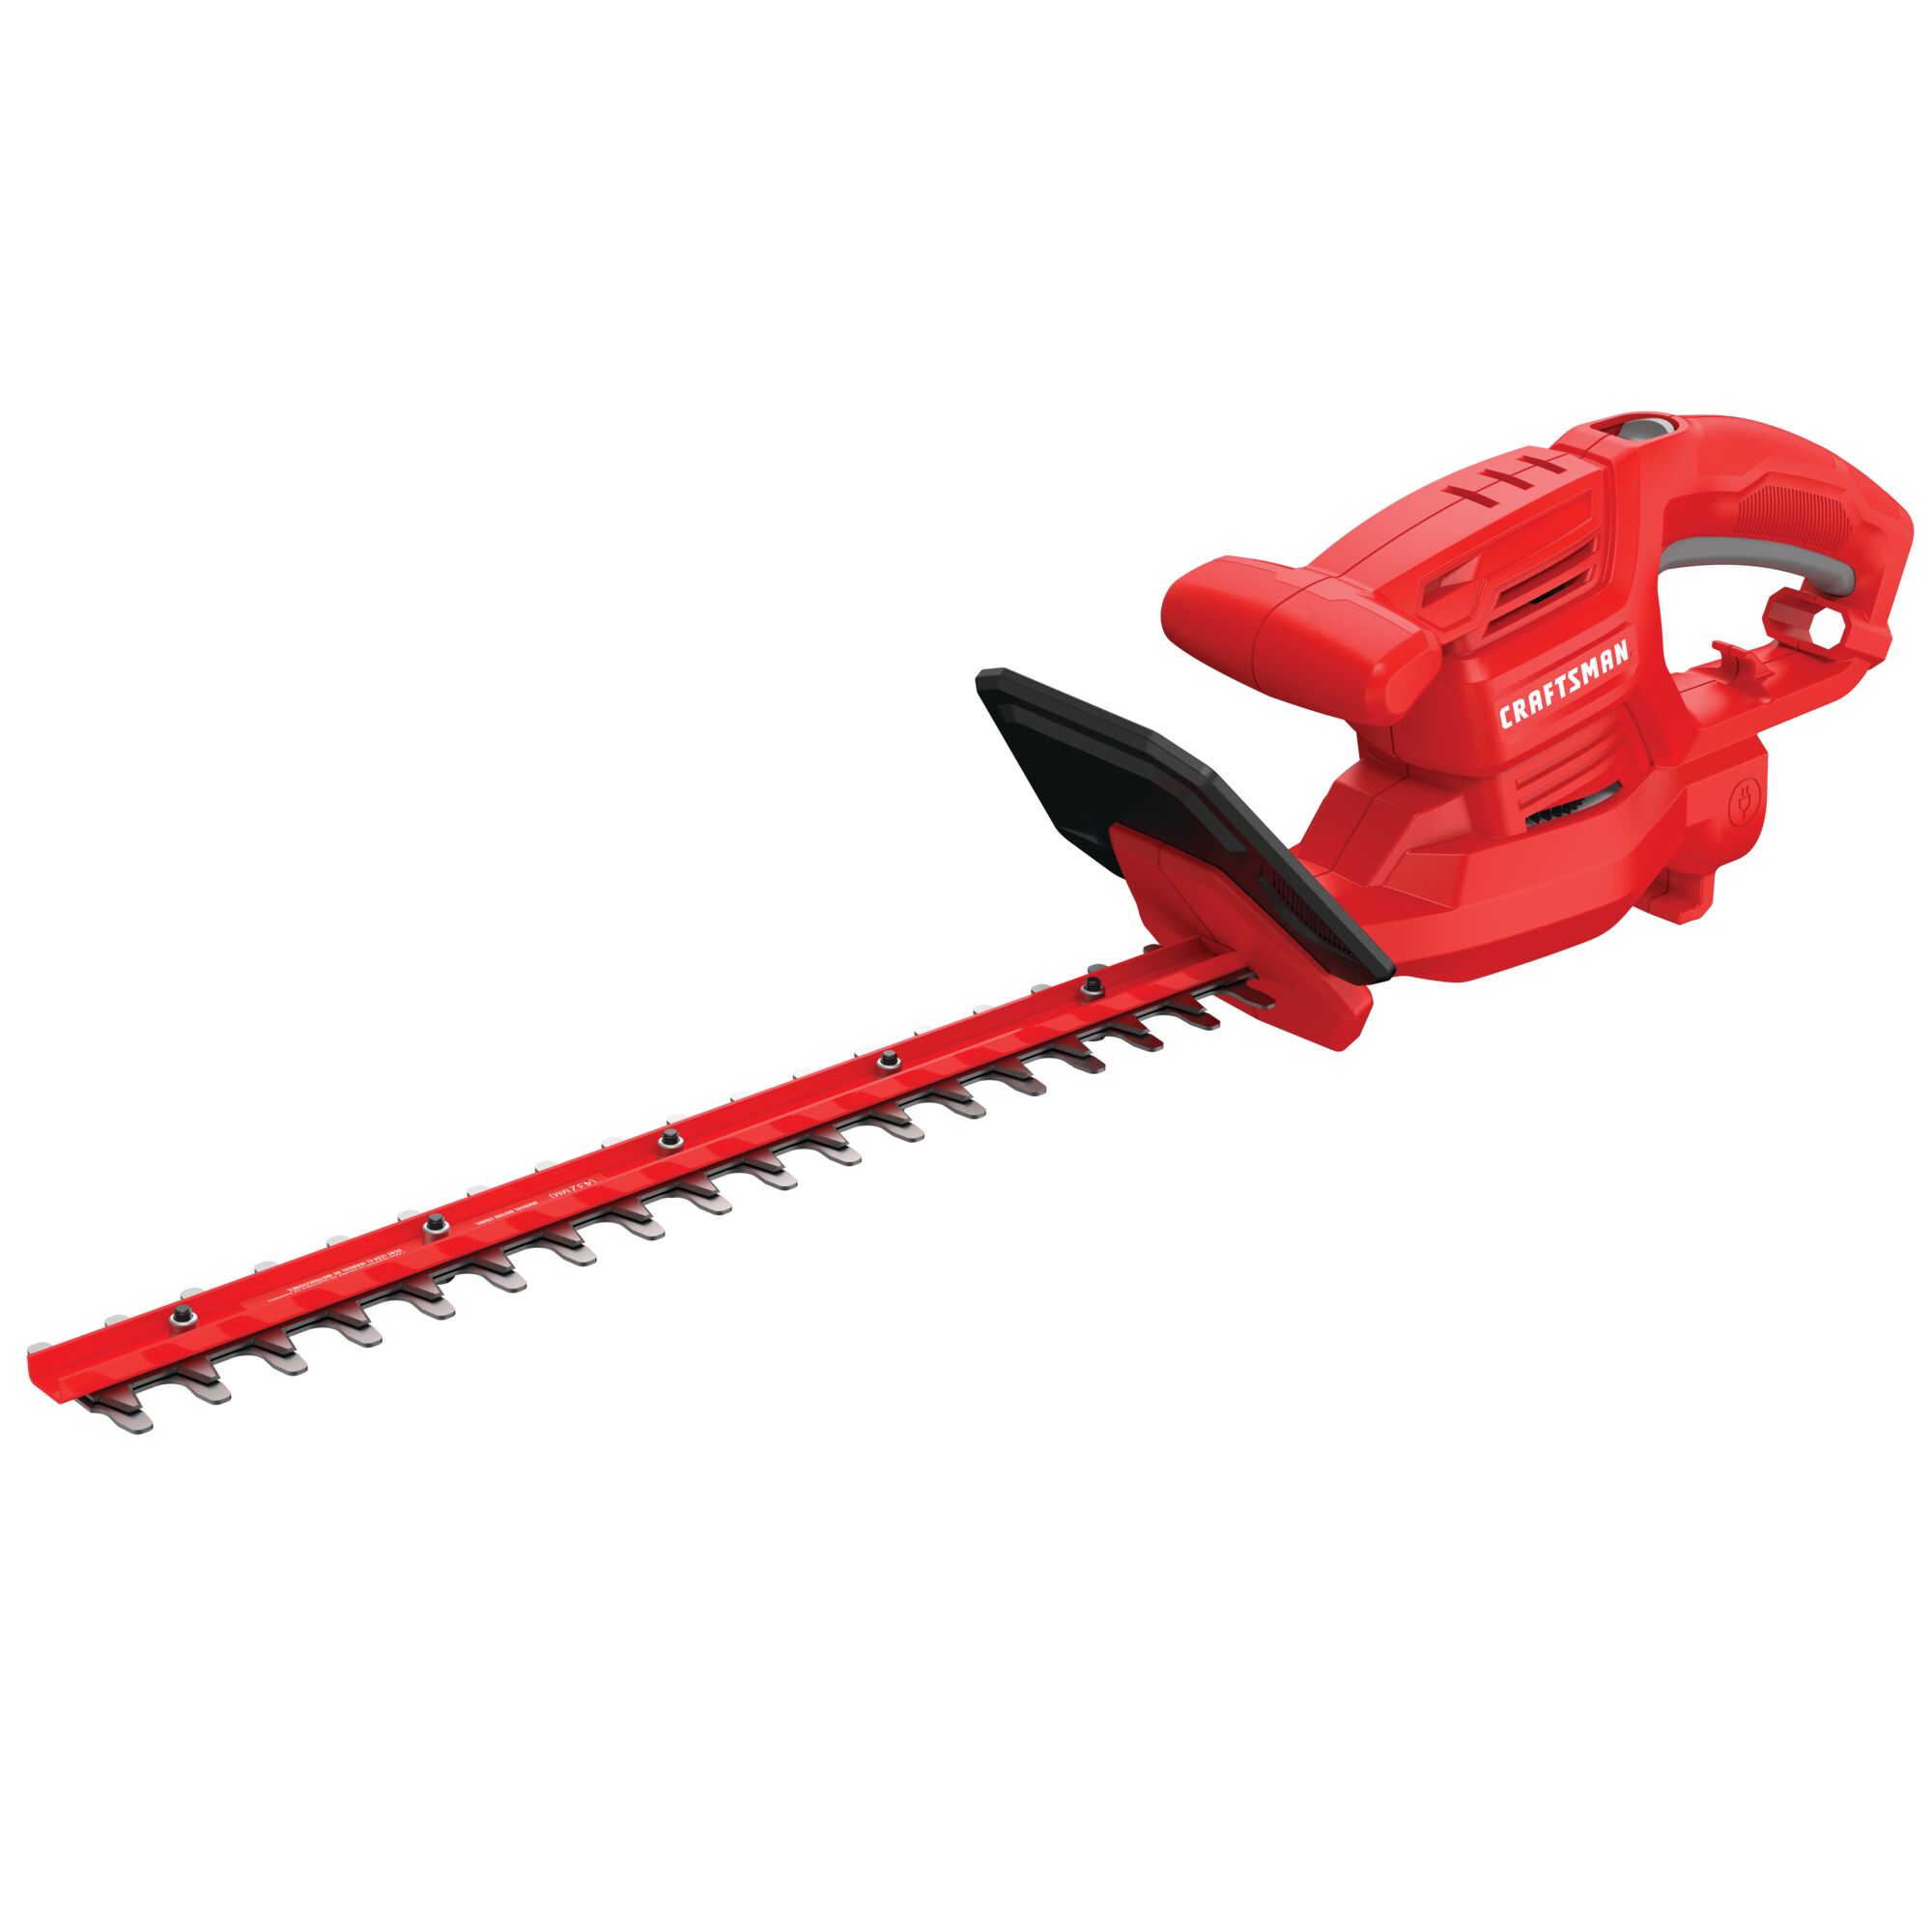 Profile of 3 dot 2 amp 17 inches electric hedge trimmer.